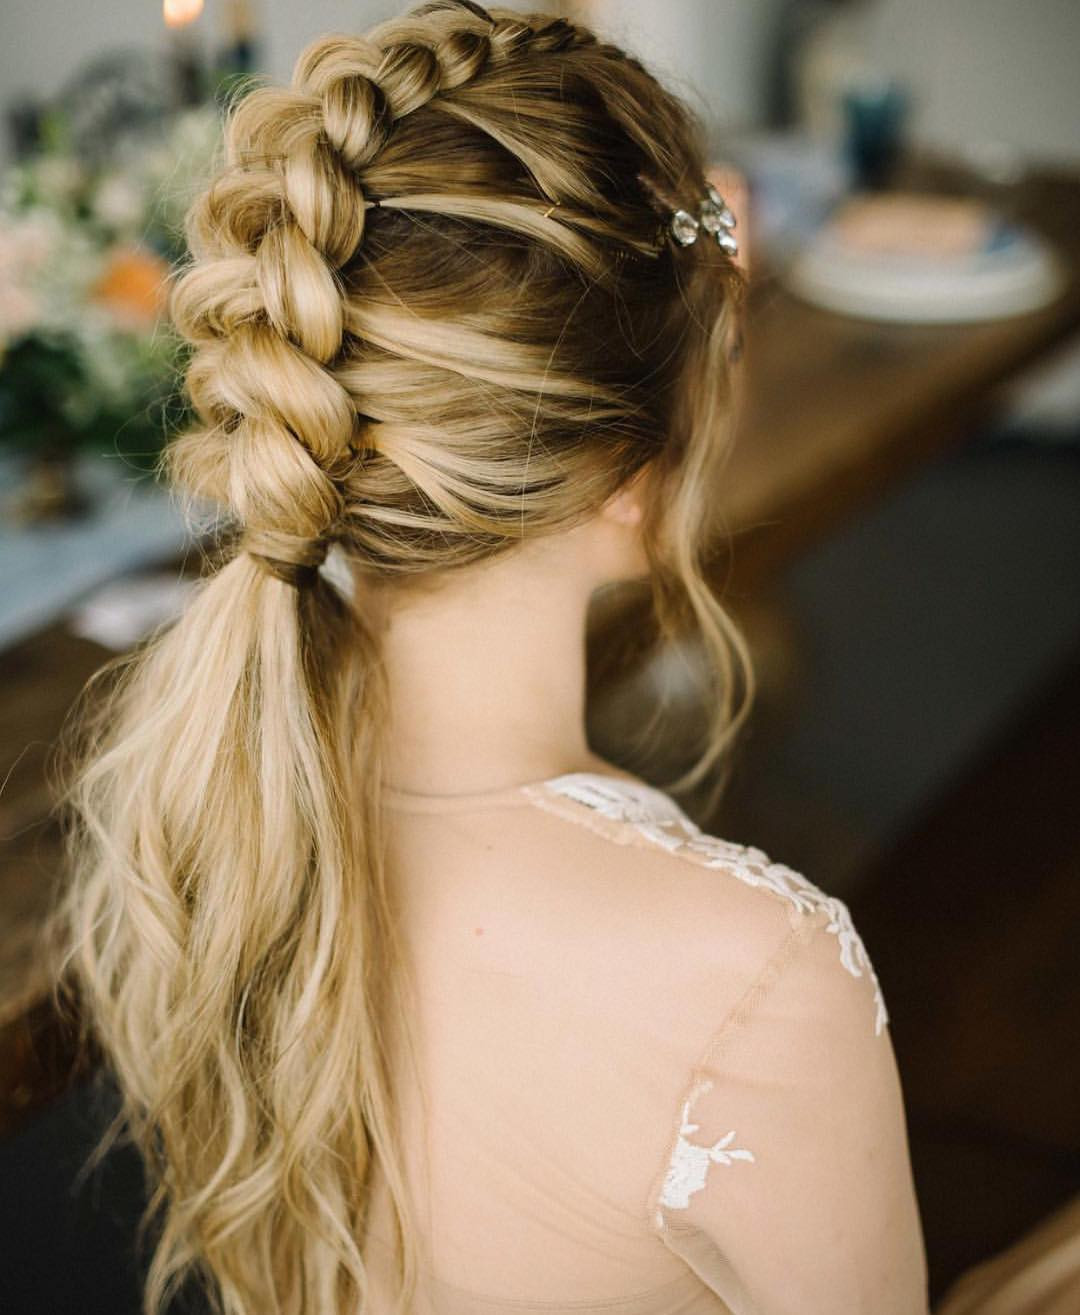 Wedding Hairstyles With Braid
 10 Braided Hairstyles for Long Hair Weddings Festivals